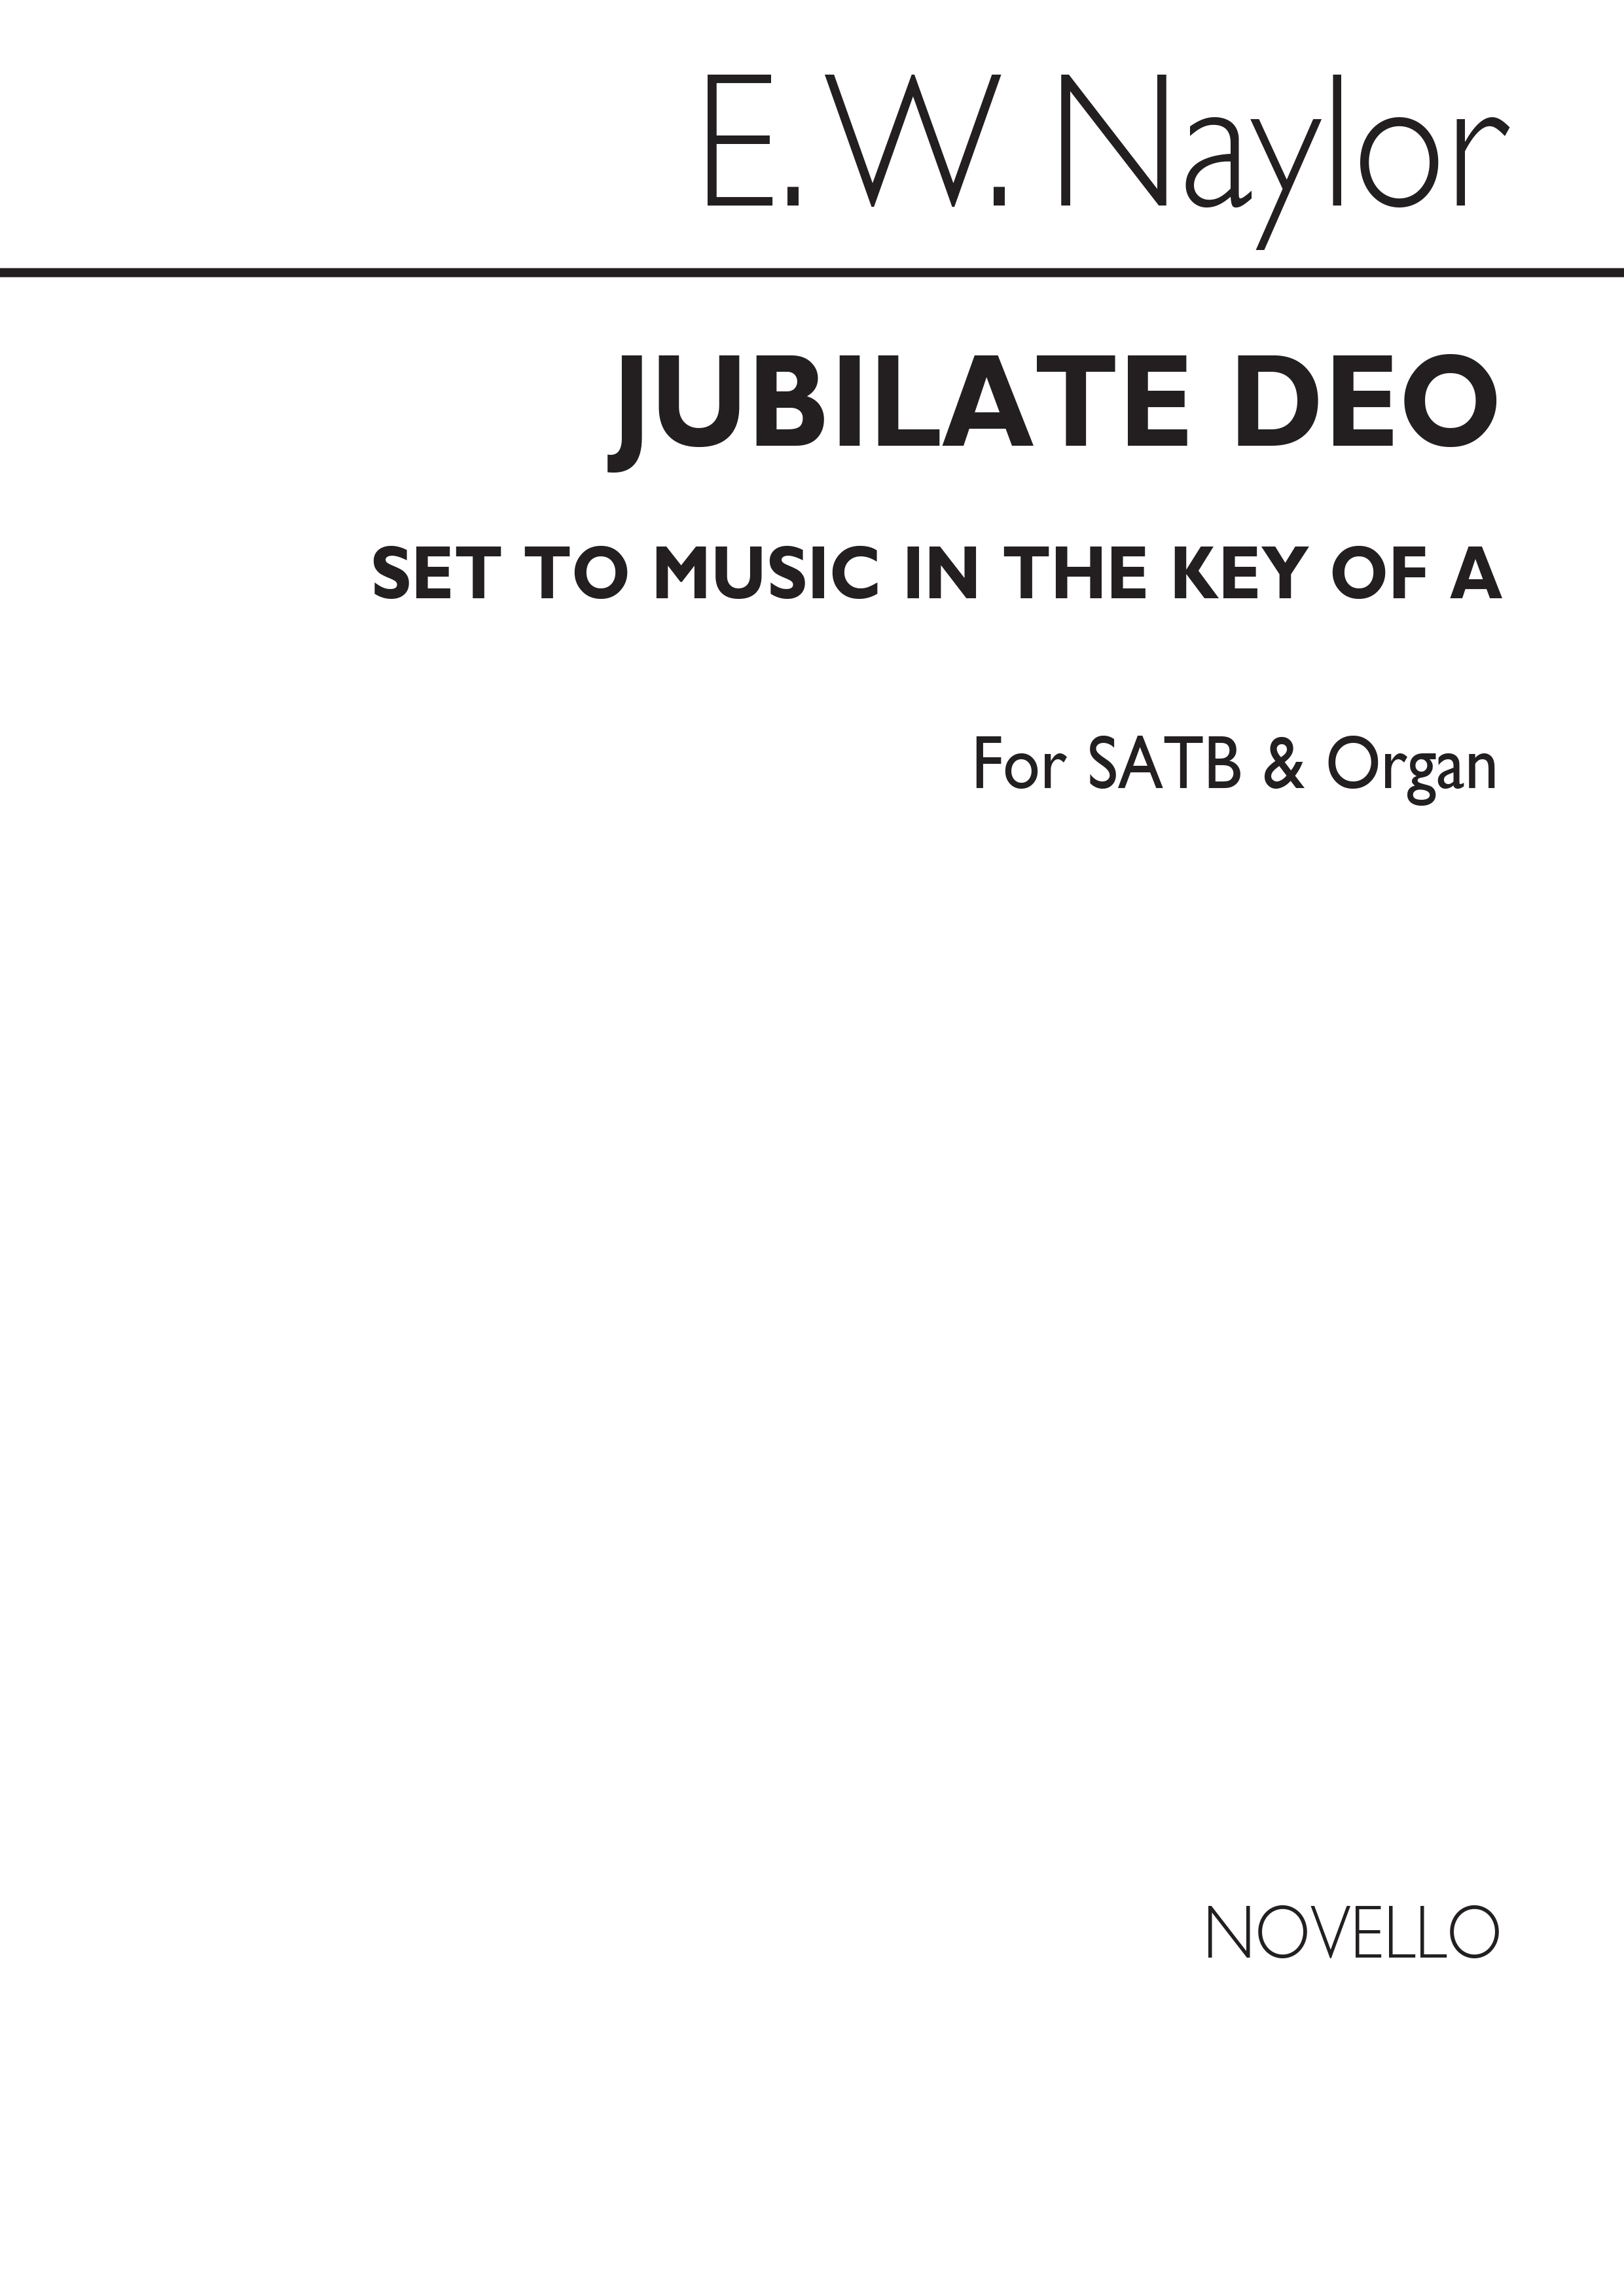 Edward W. Naylor: Jubilate Deo In A for SATB Chorus with Organ acc.